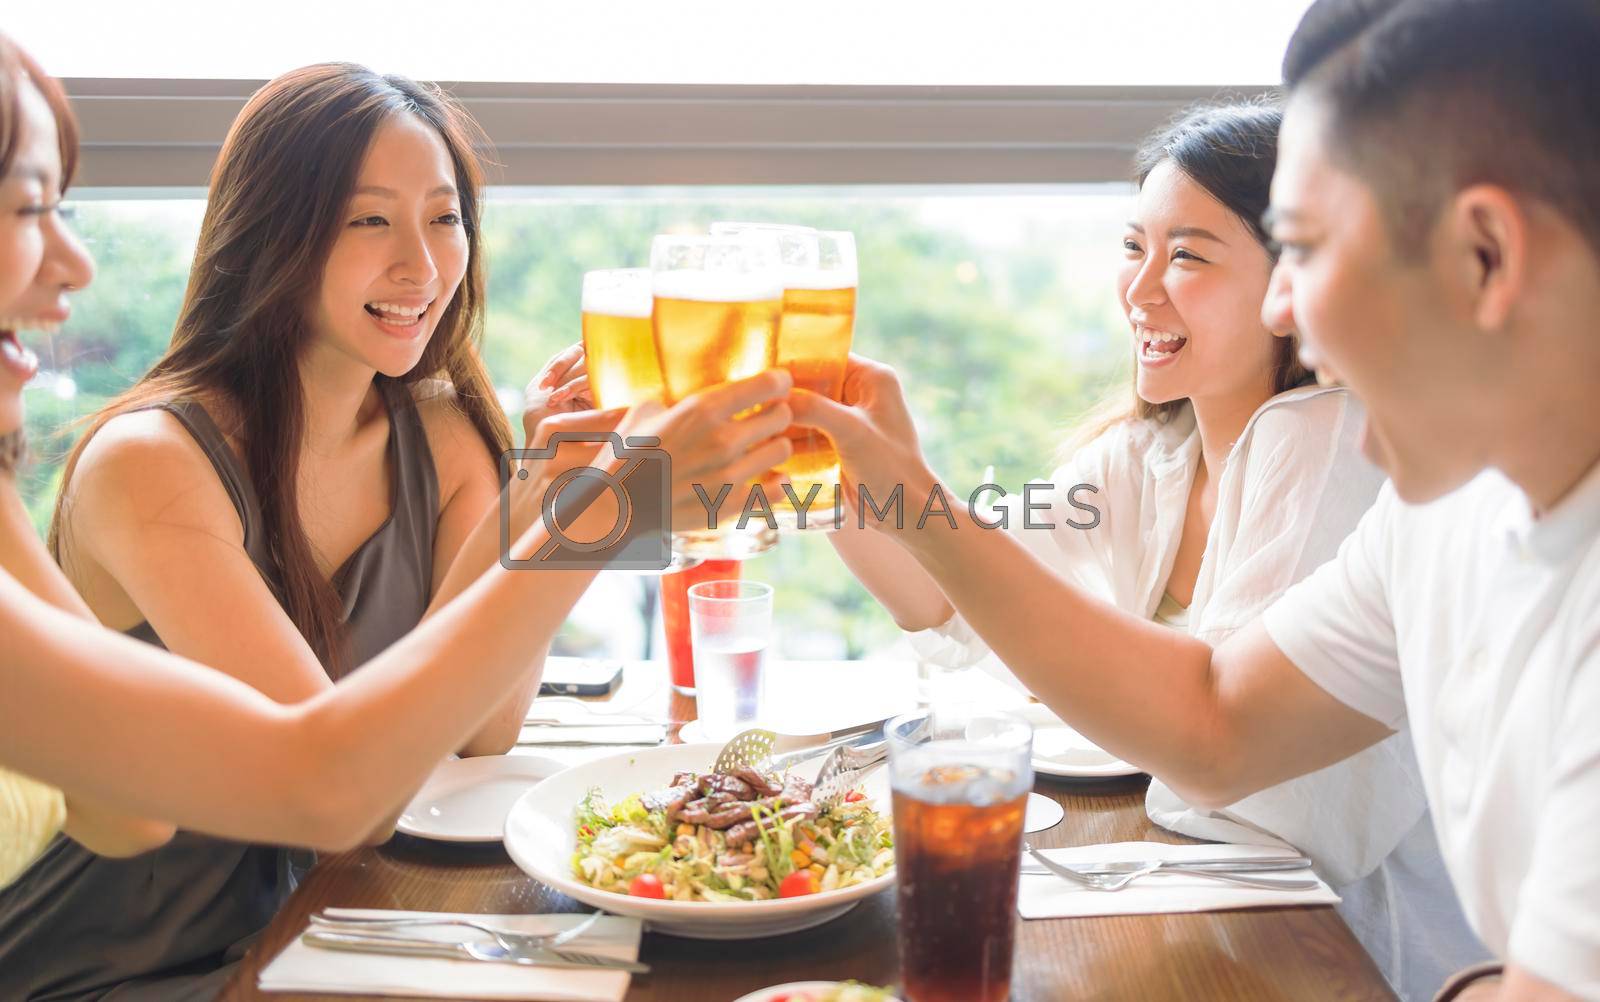 Royalty free image of Happy Young group enjoying food and drink in restaurant by tomwang